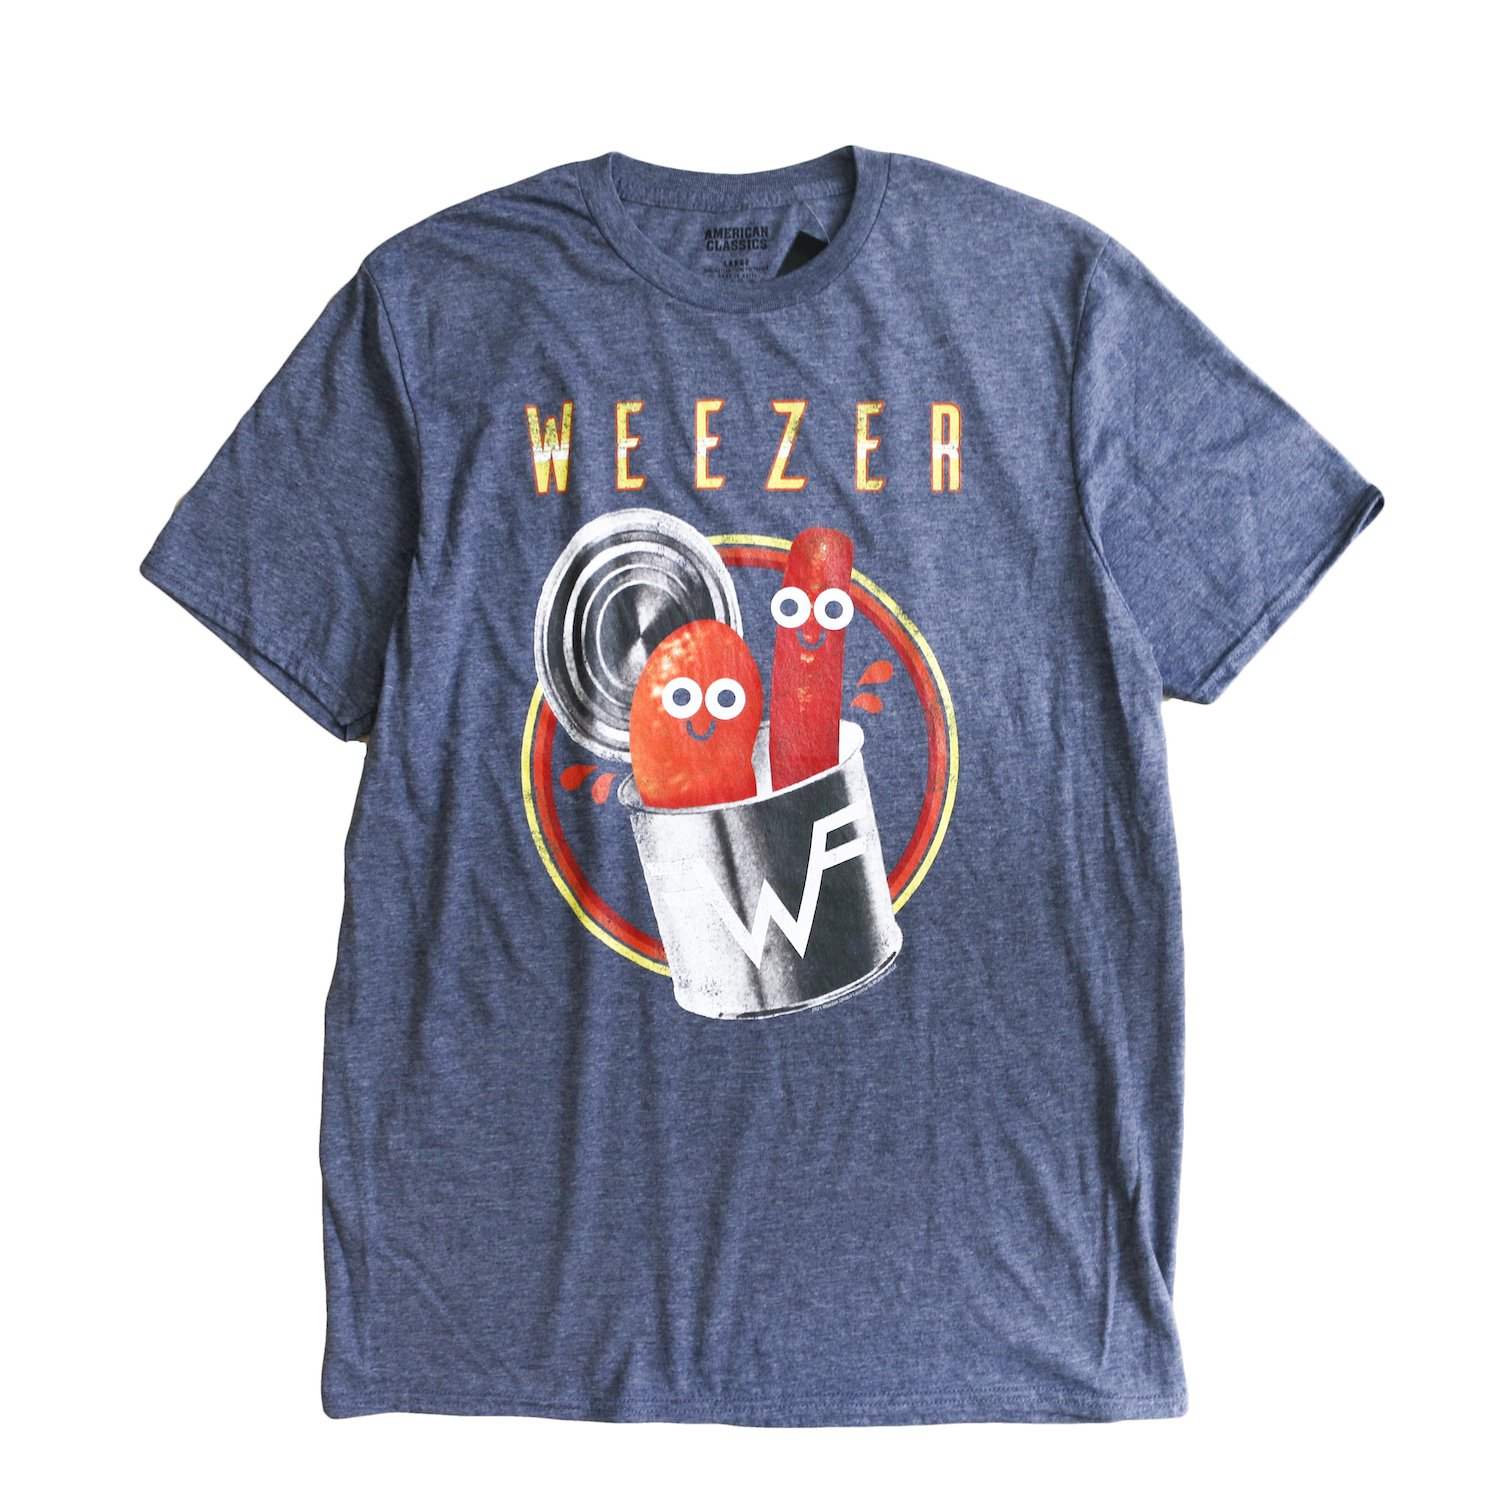 <img class='new_mark_img1' src='https://img.shop-pro.jp/img/new/icons8.gif' style='border:none;display:inline;margin:0px;padding:0px;width:auto;' /> Music Tee / S/S WEEZER 